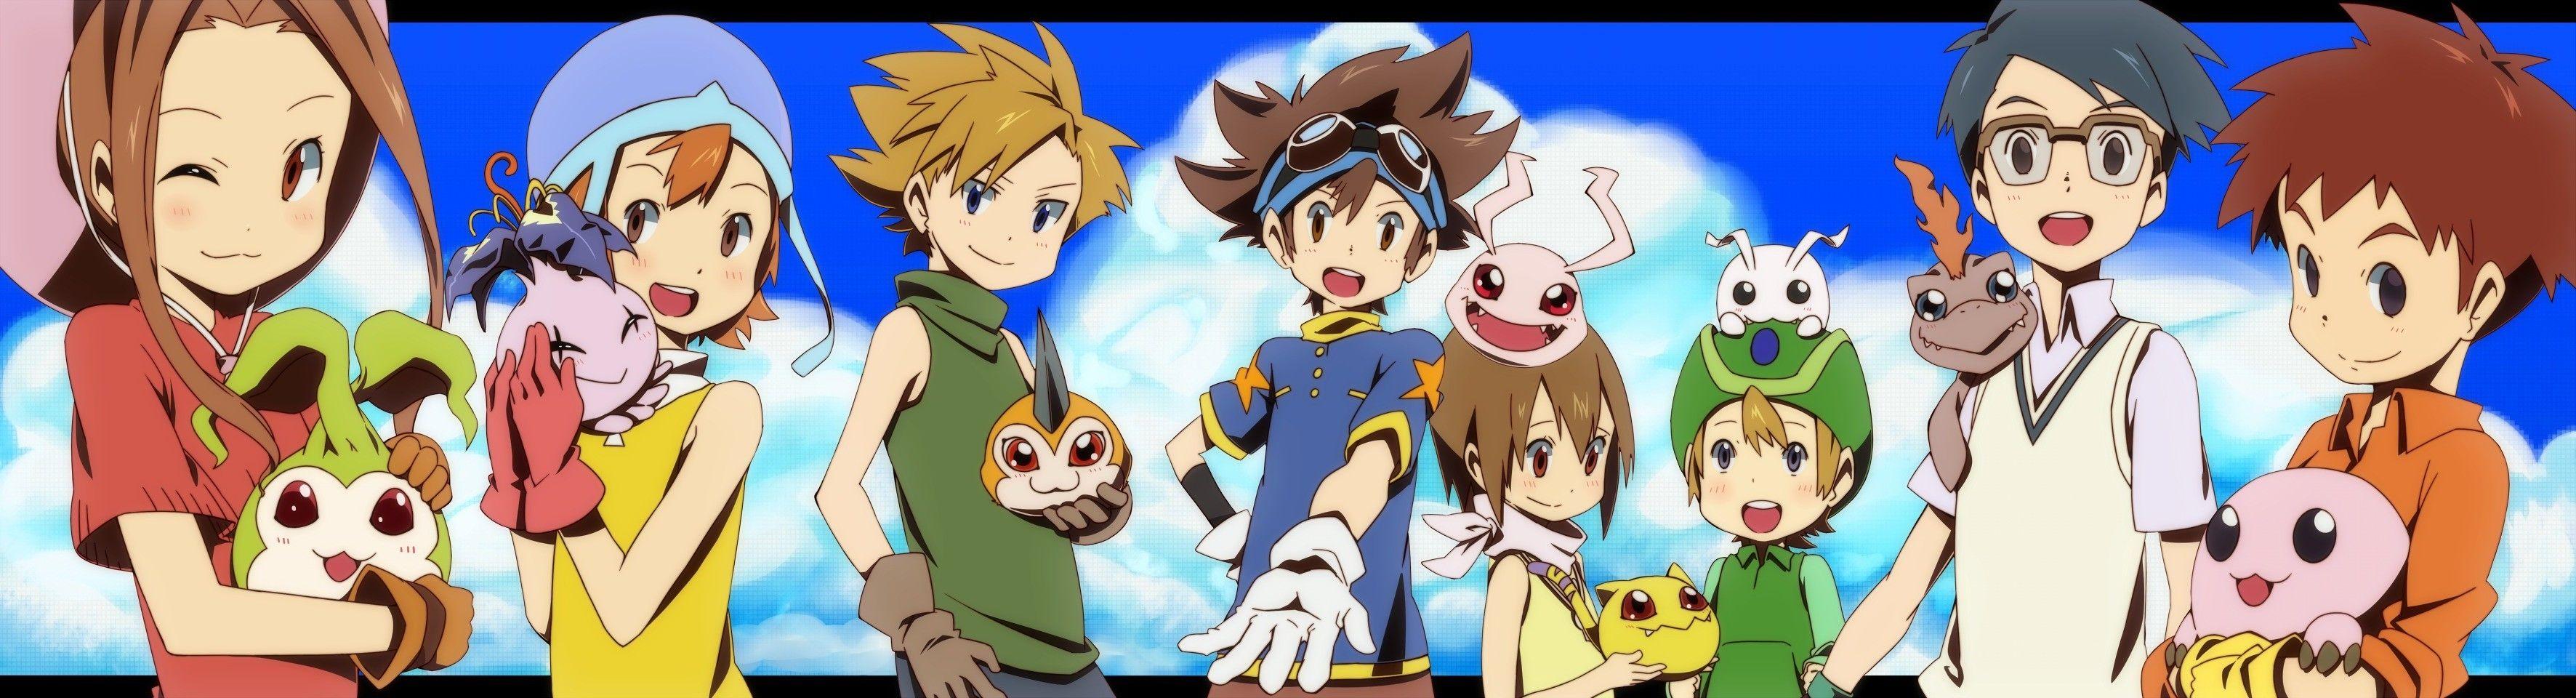 digimon adventure anime wallpaper and background